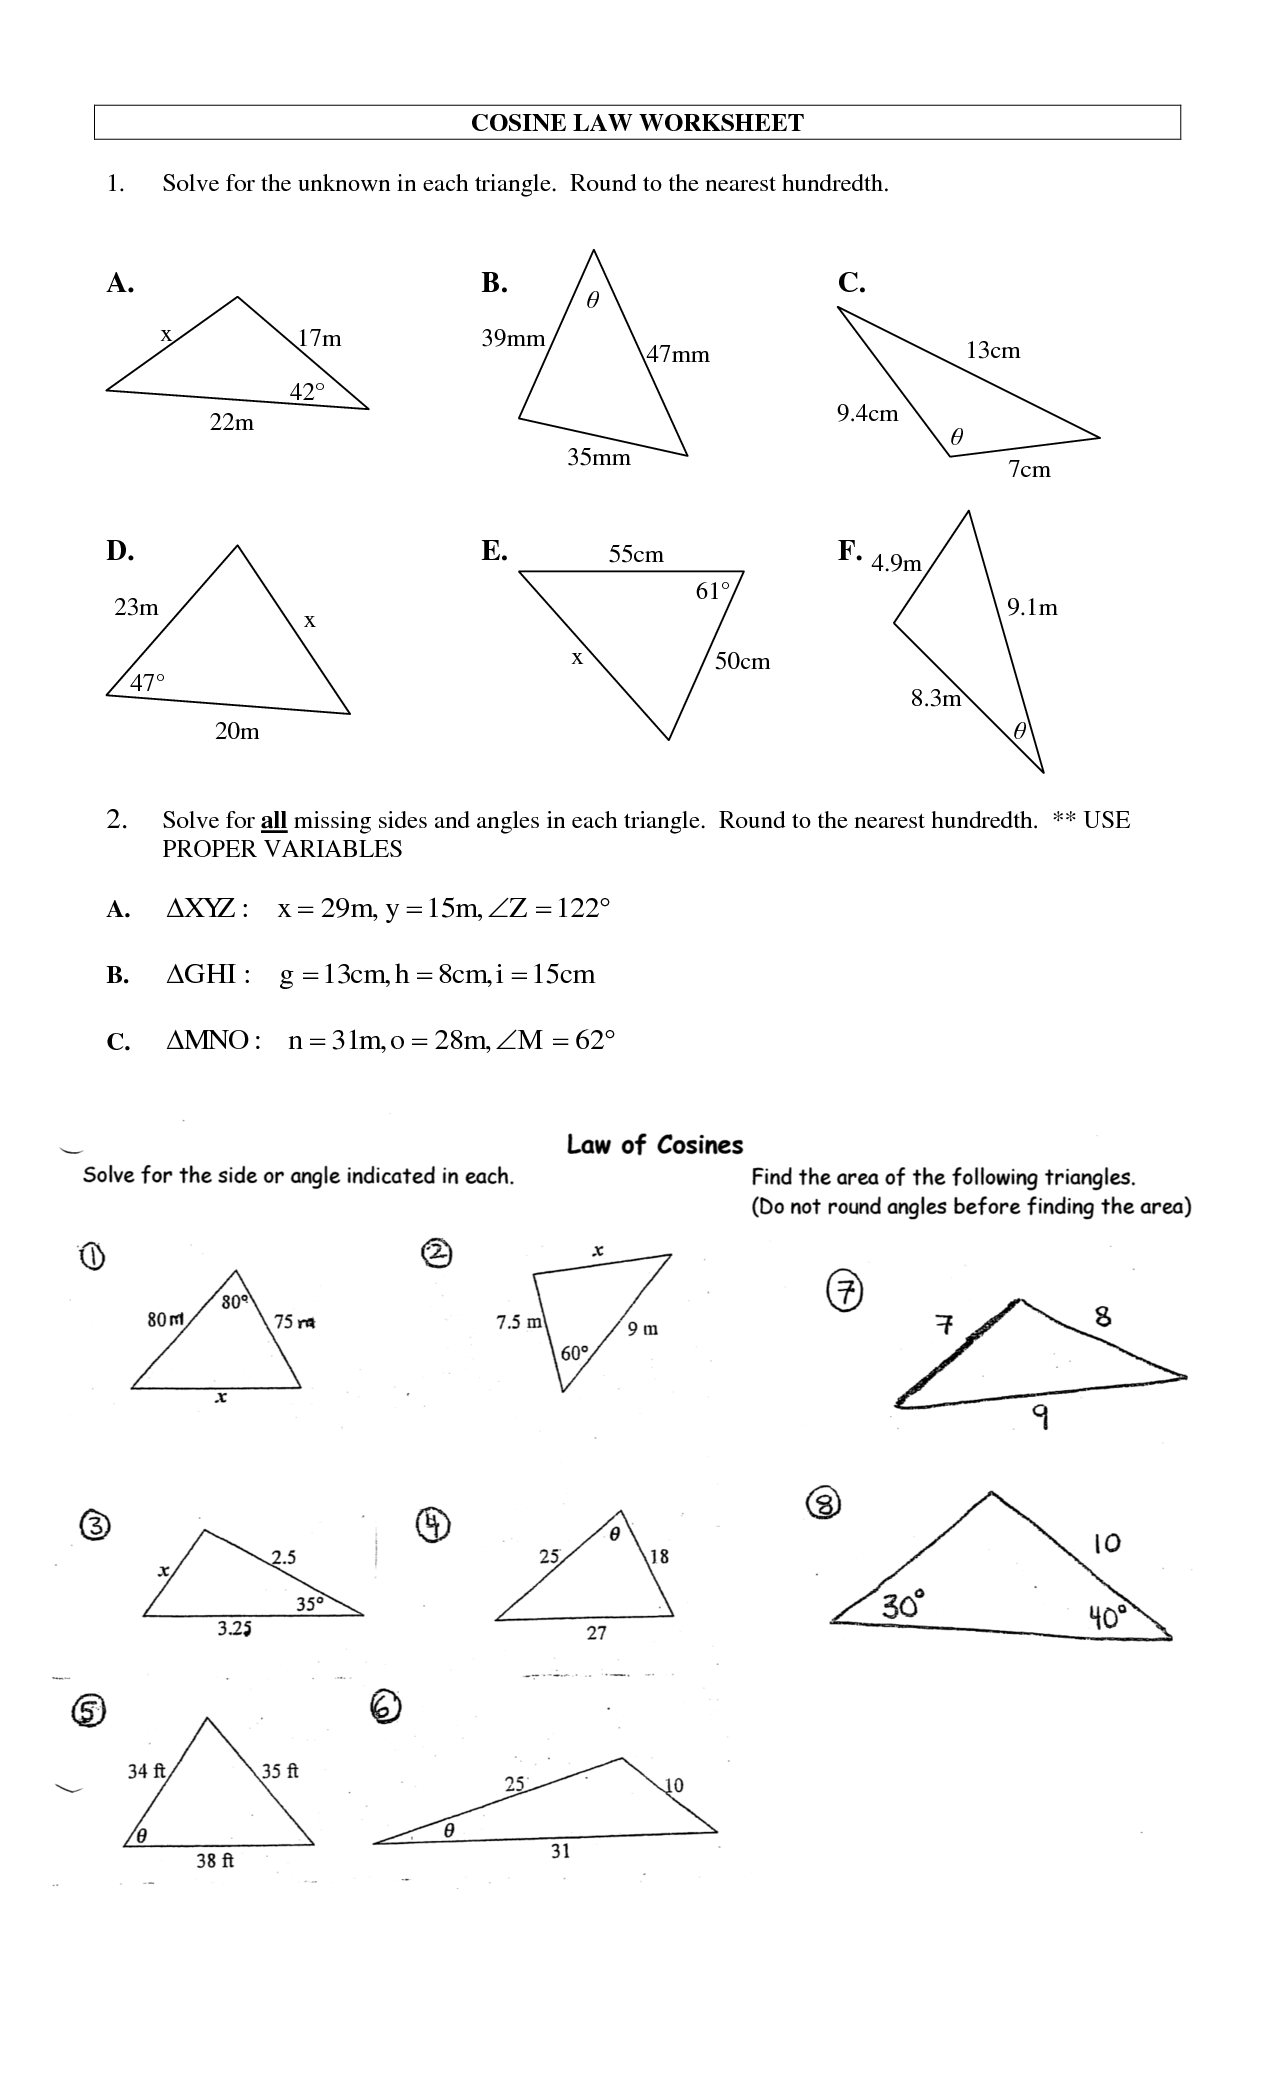 law-of-sines-and-cosines-worksheet-with-answers-smoochinspire